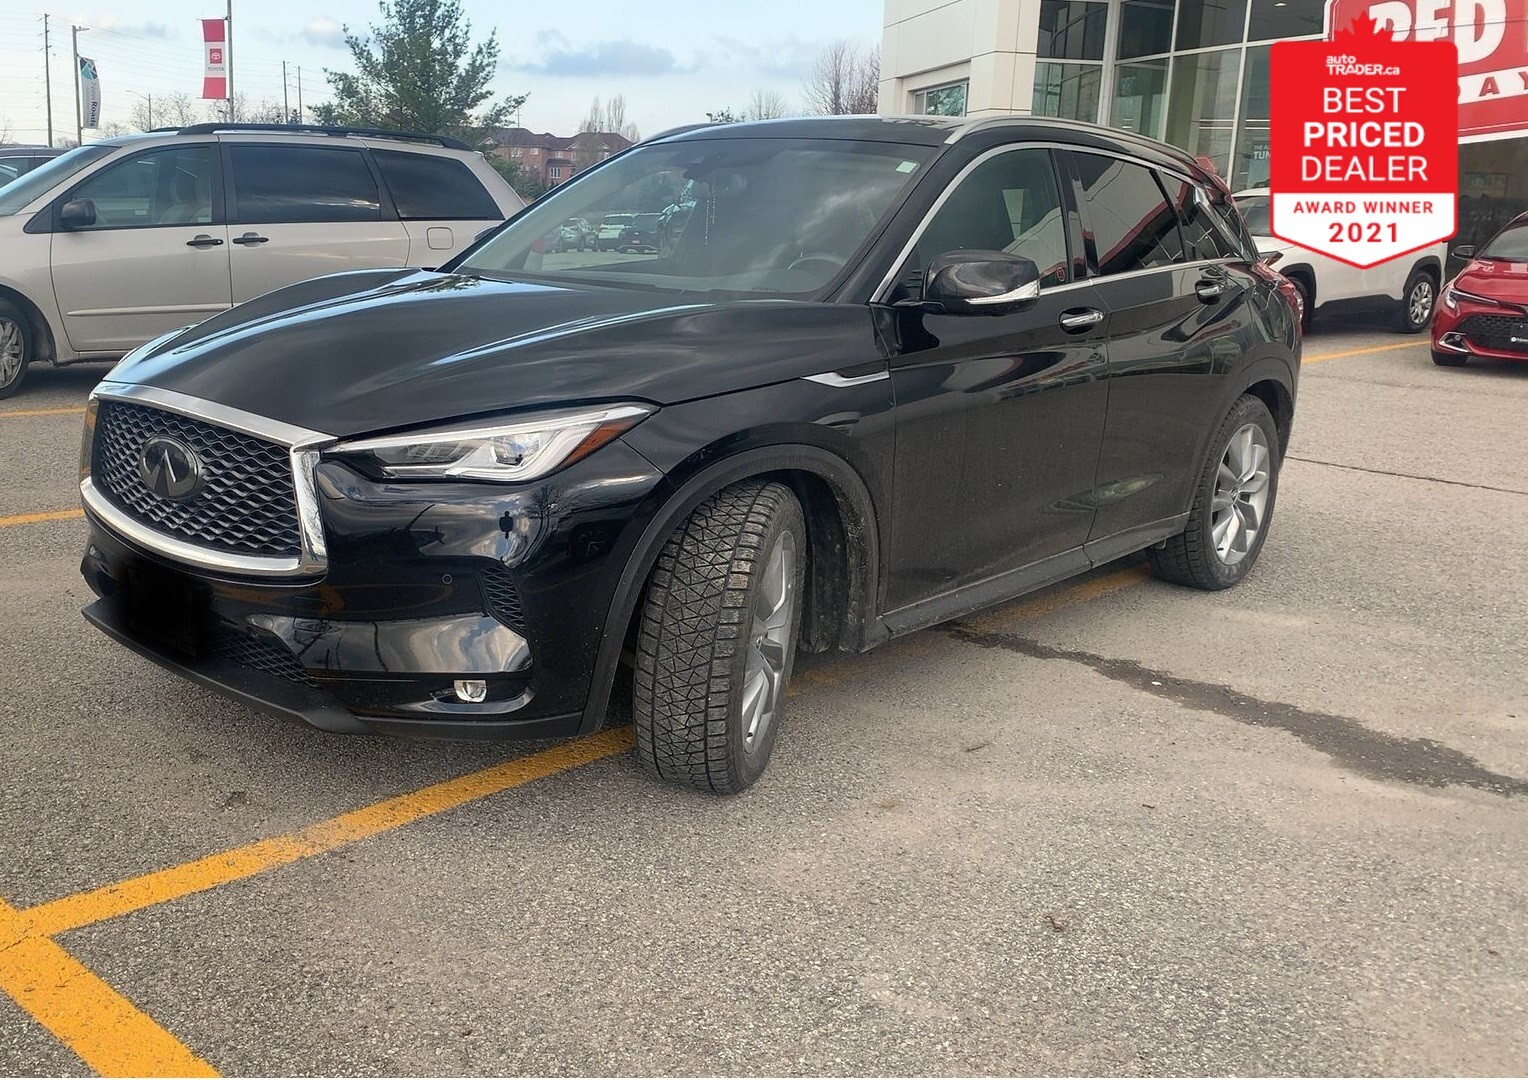 2019 Infiniti QX50 ProACTIVE, Loaded, One Owner, 22763 kms below avg